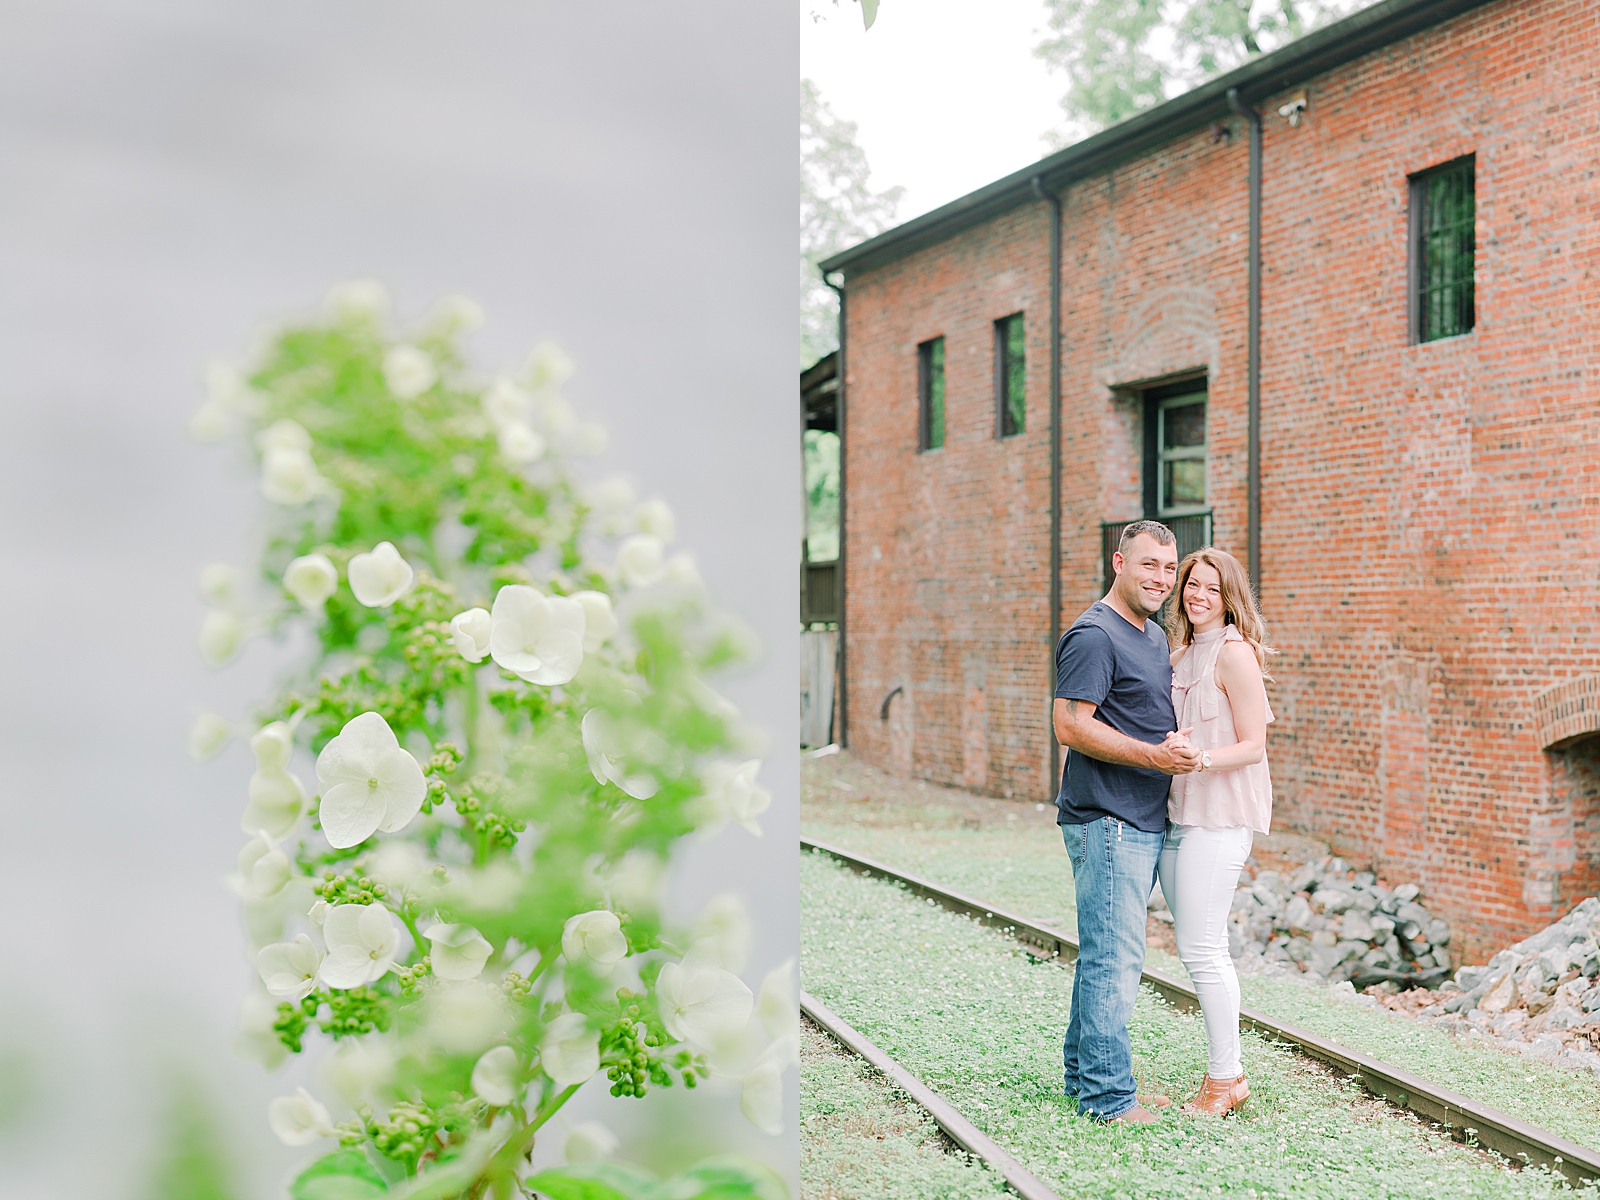 Hackney Warehouse Engagement Session Detail of plant with white flowers and couple smiling on railroad tracks Photos